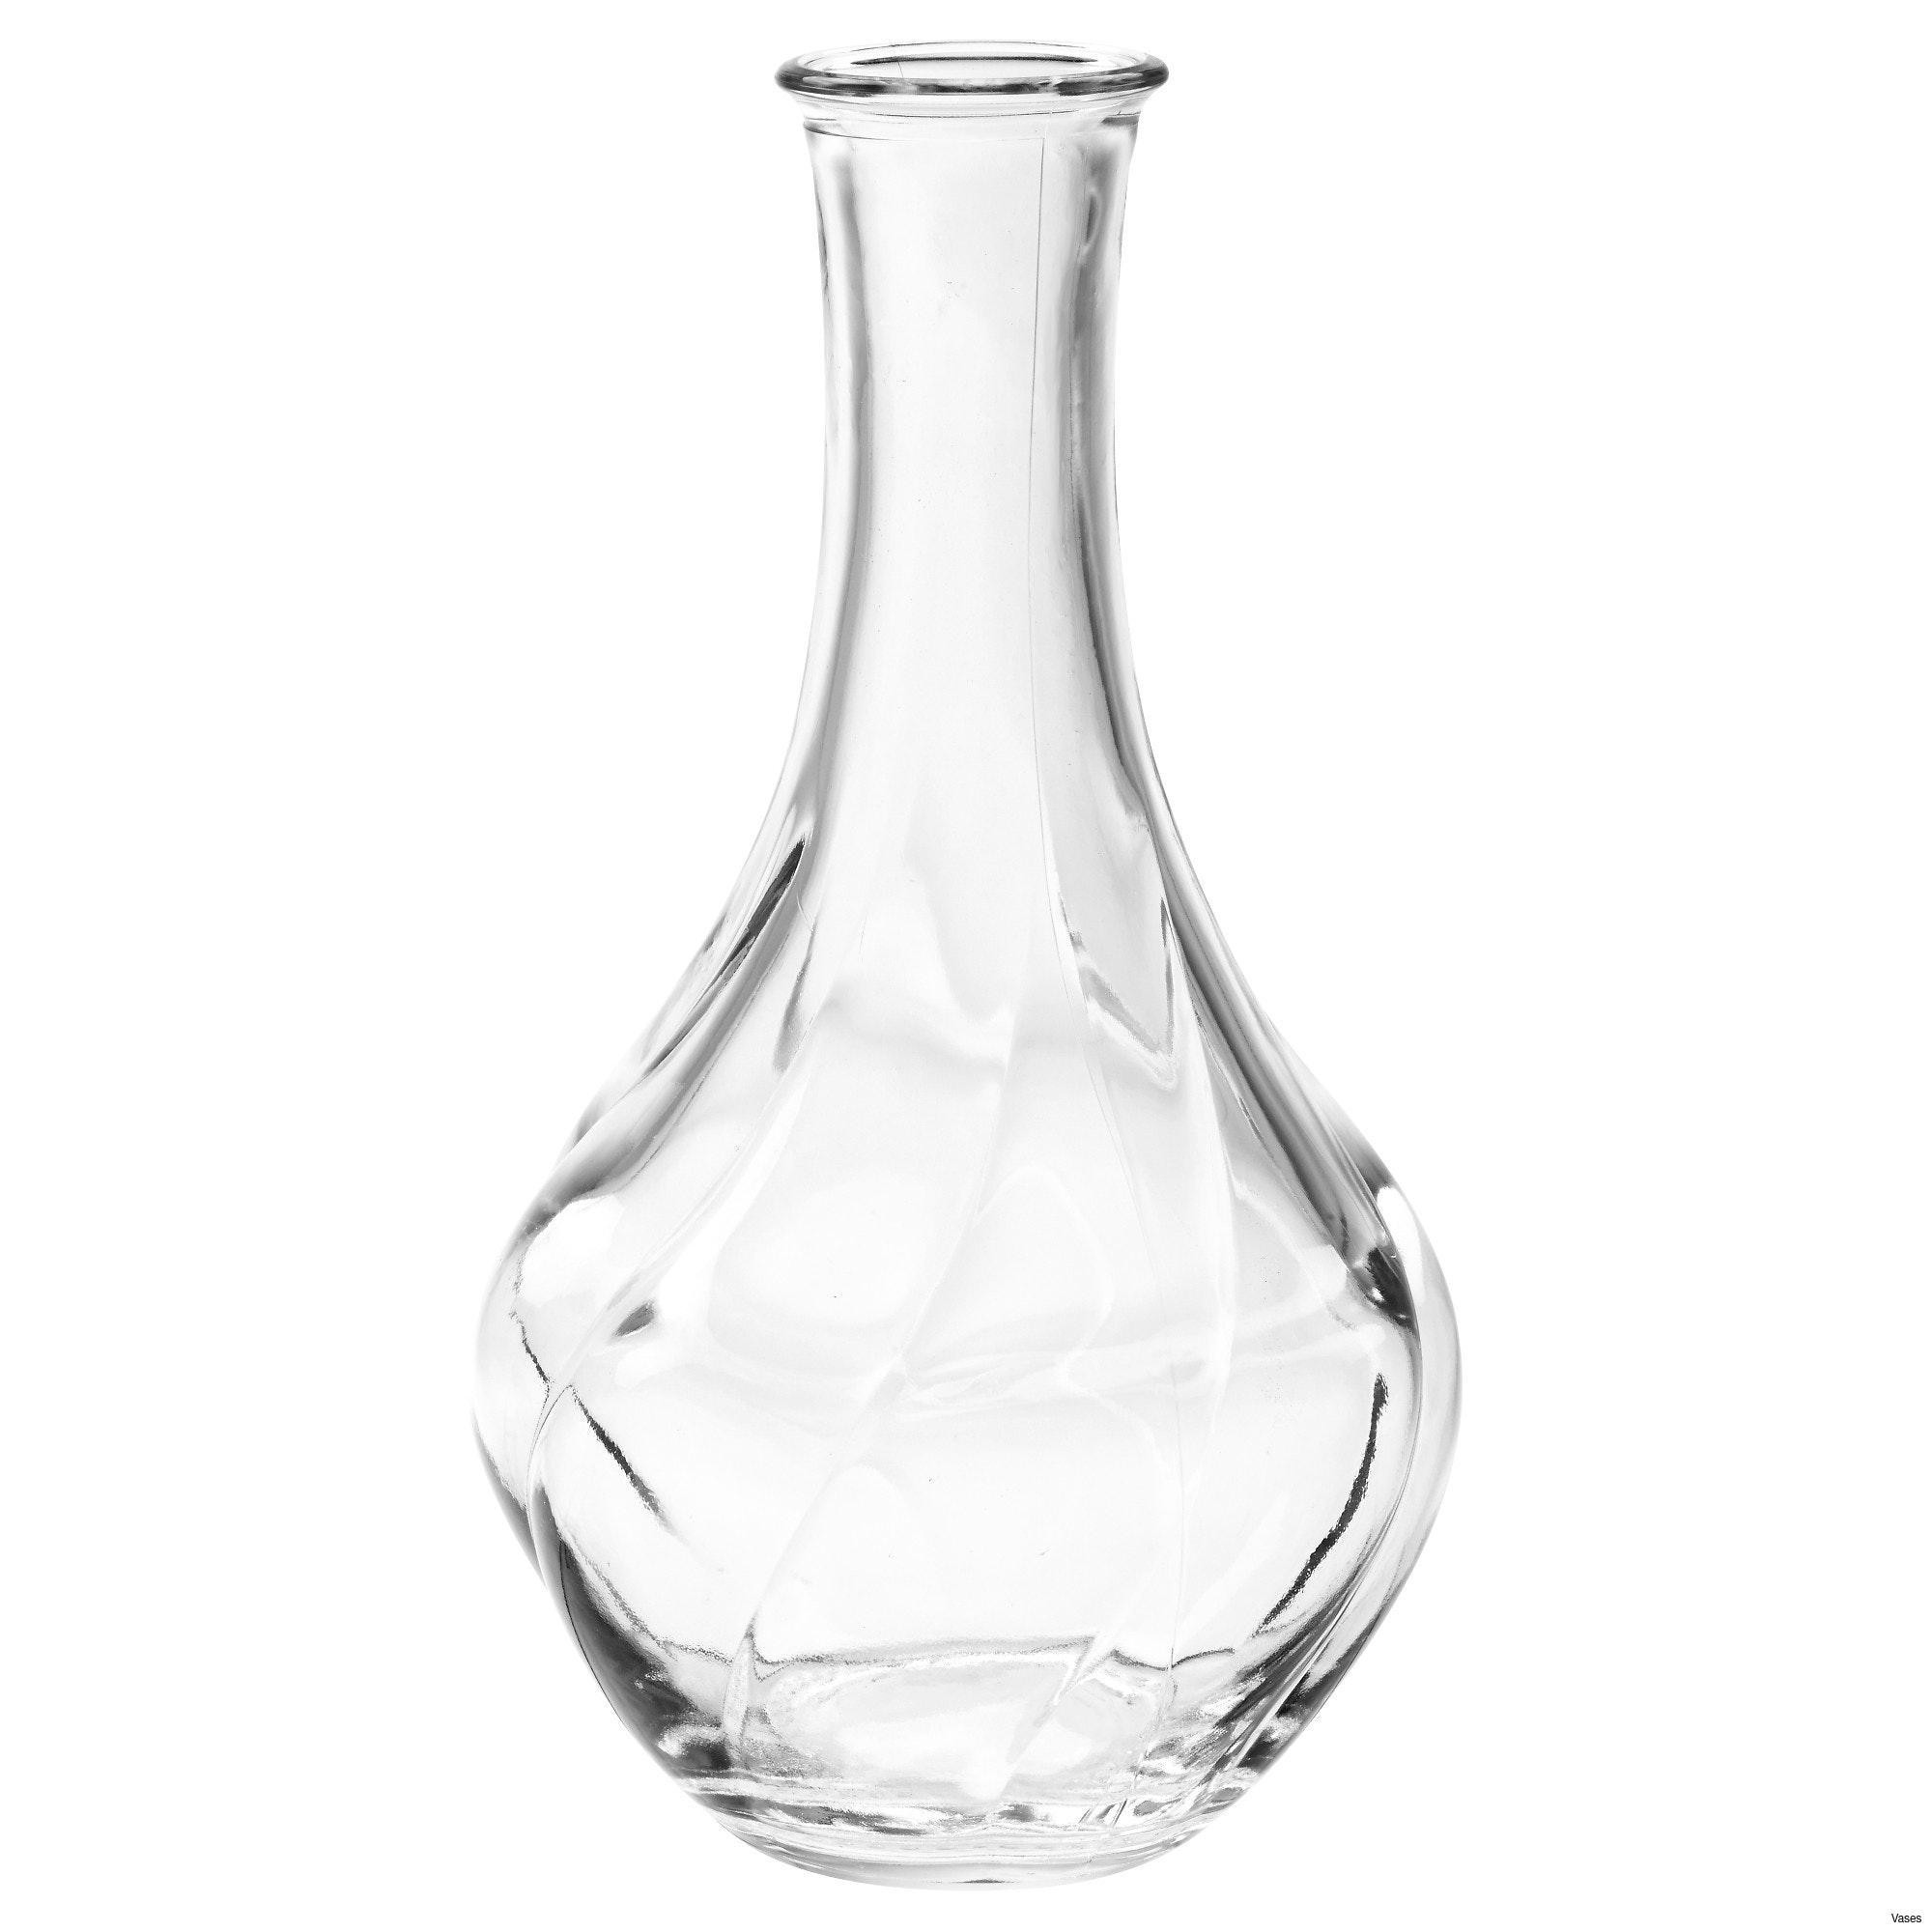 big vases for cheap of fetching big vases for living room in living room glass vases fresh pertaining to fetching big vases for living room in living room glass vases fresh clear vase 0d tags amazing and